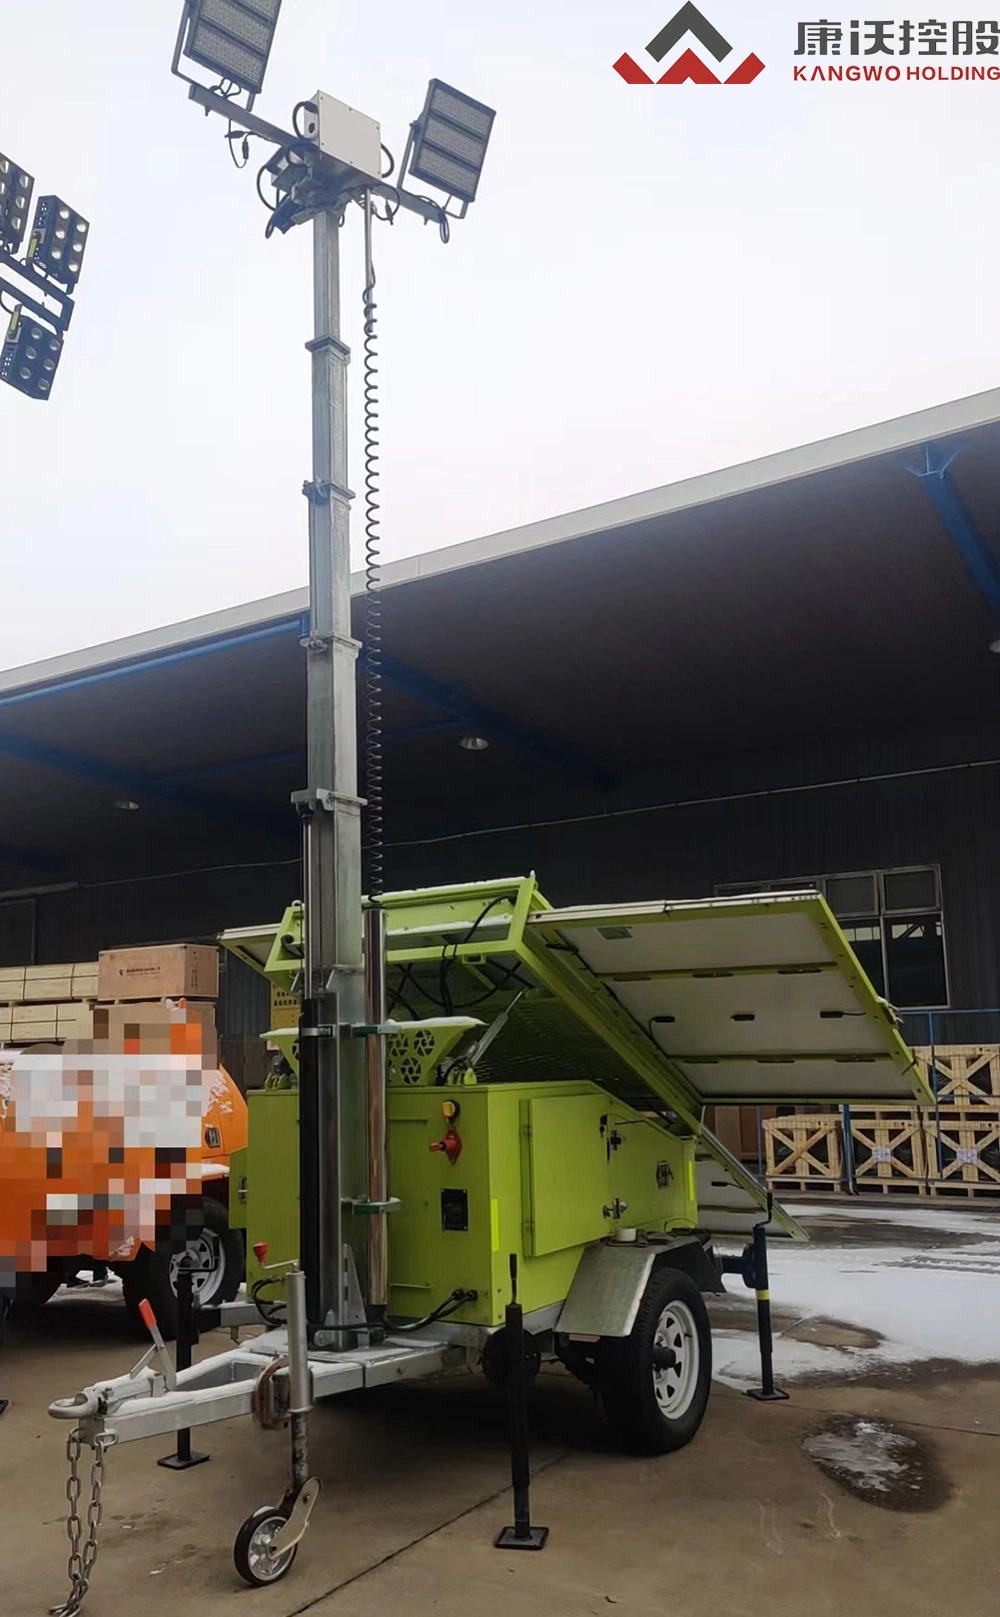 CE Dust-Proof 12X300W Energy-Efficient Tower Lighting in Construction Sites